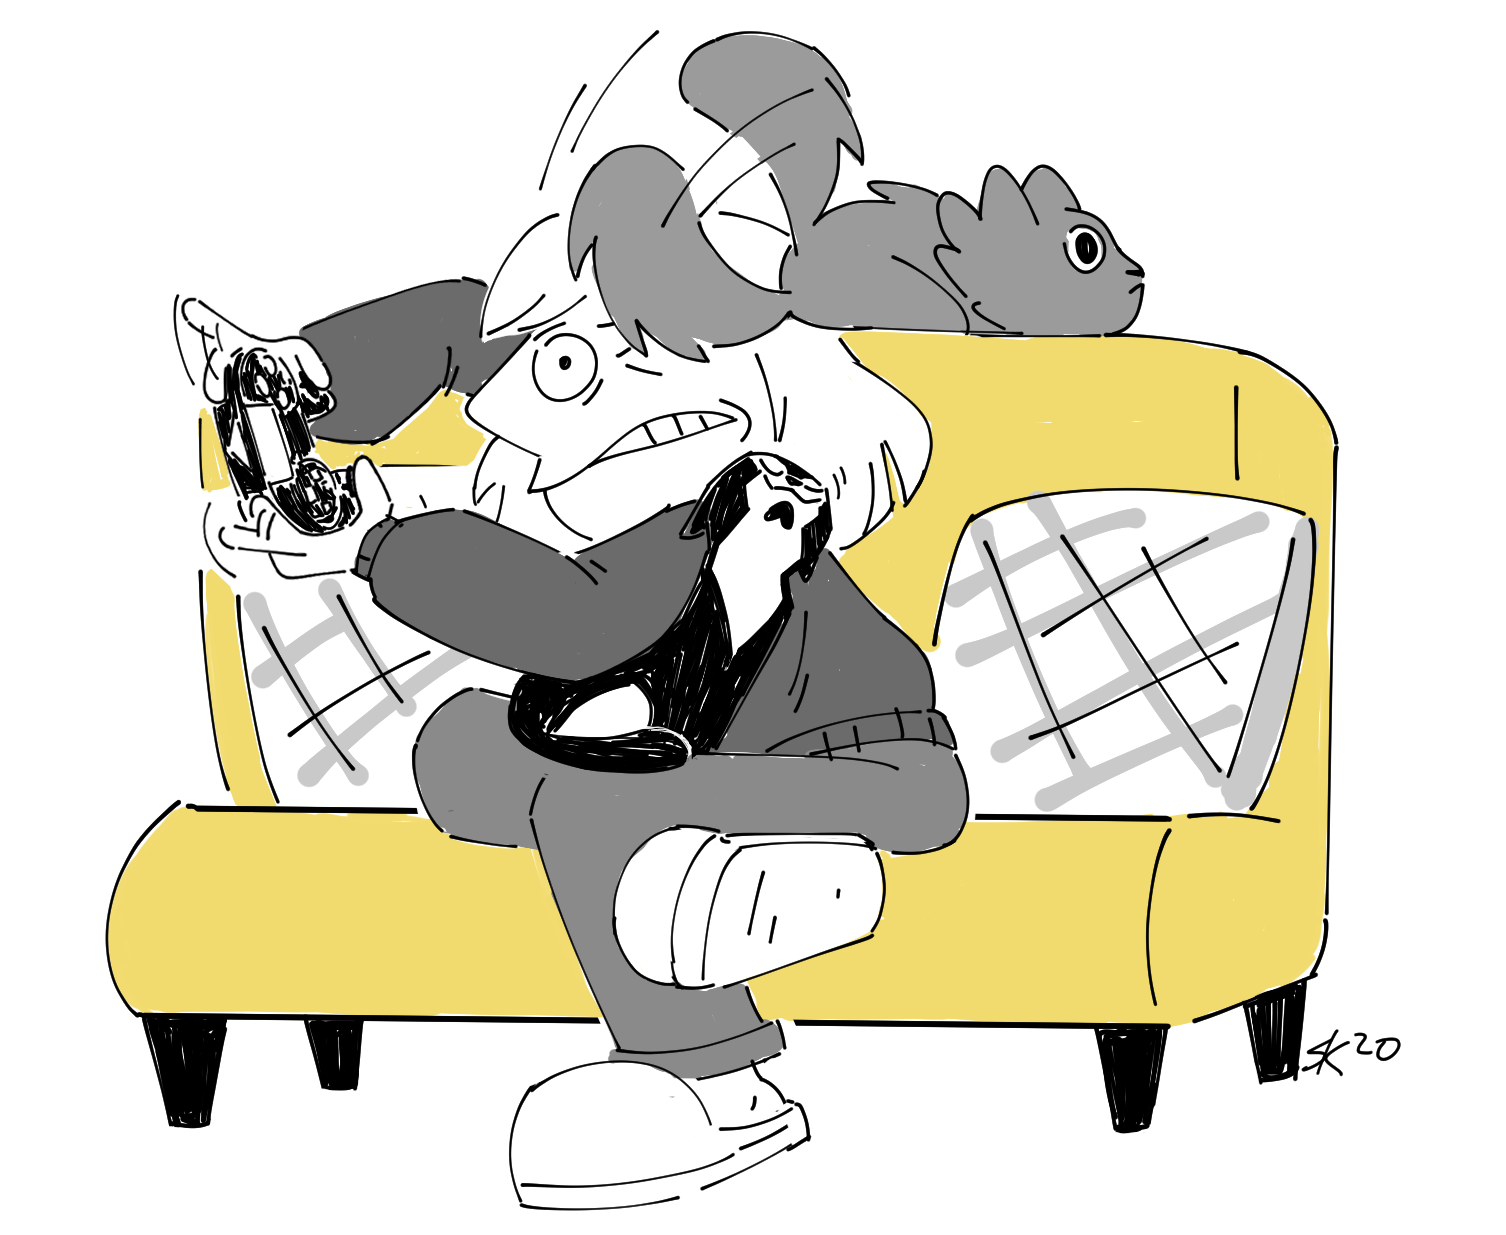 Cartoon person on yellow couch with cats.